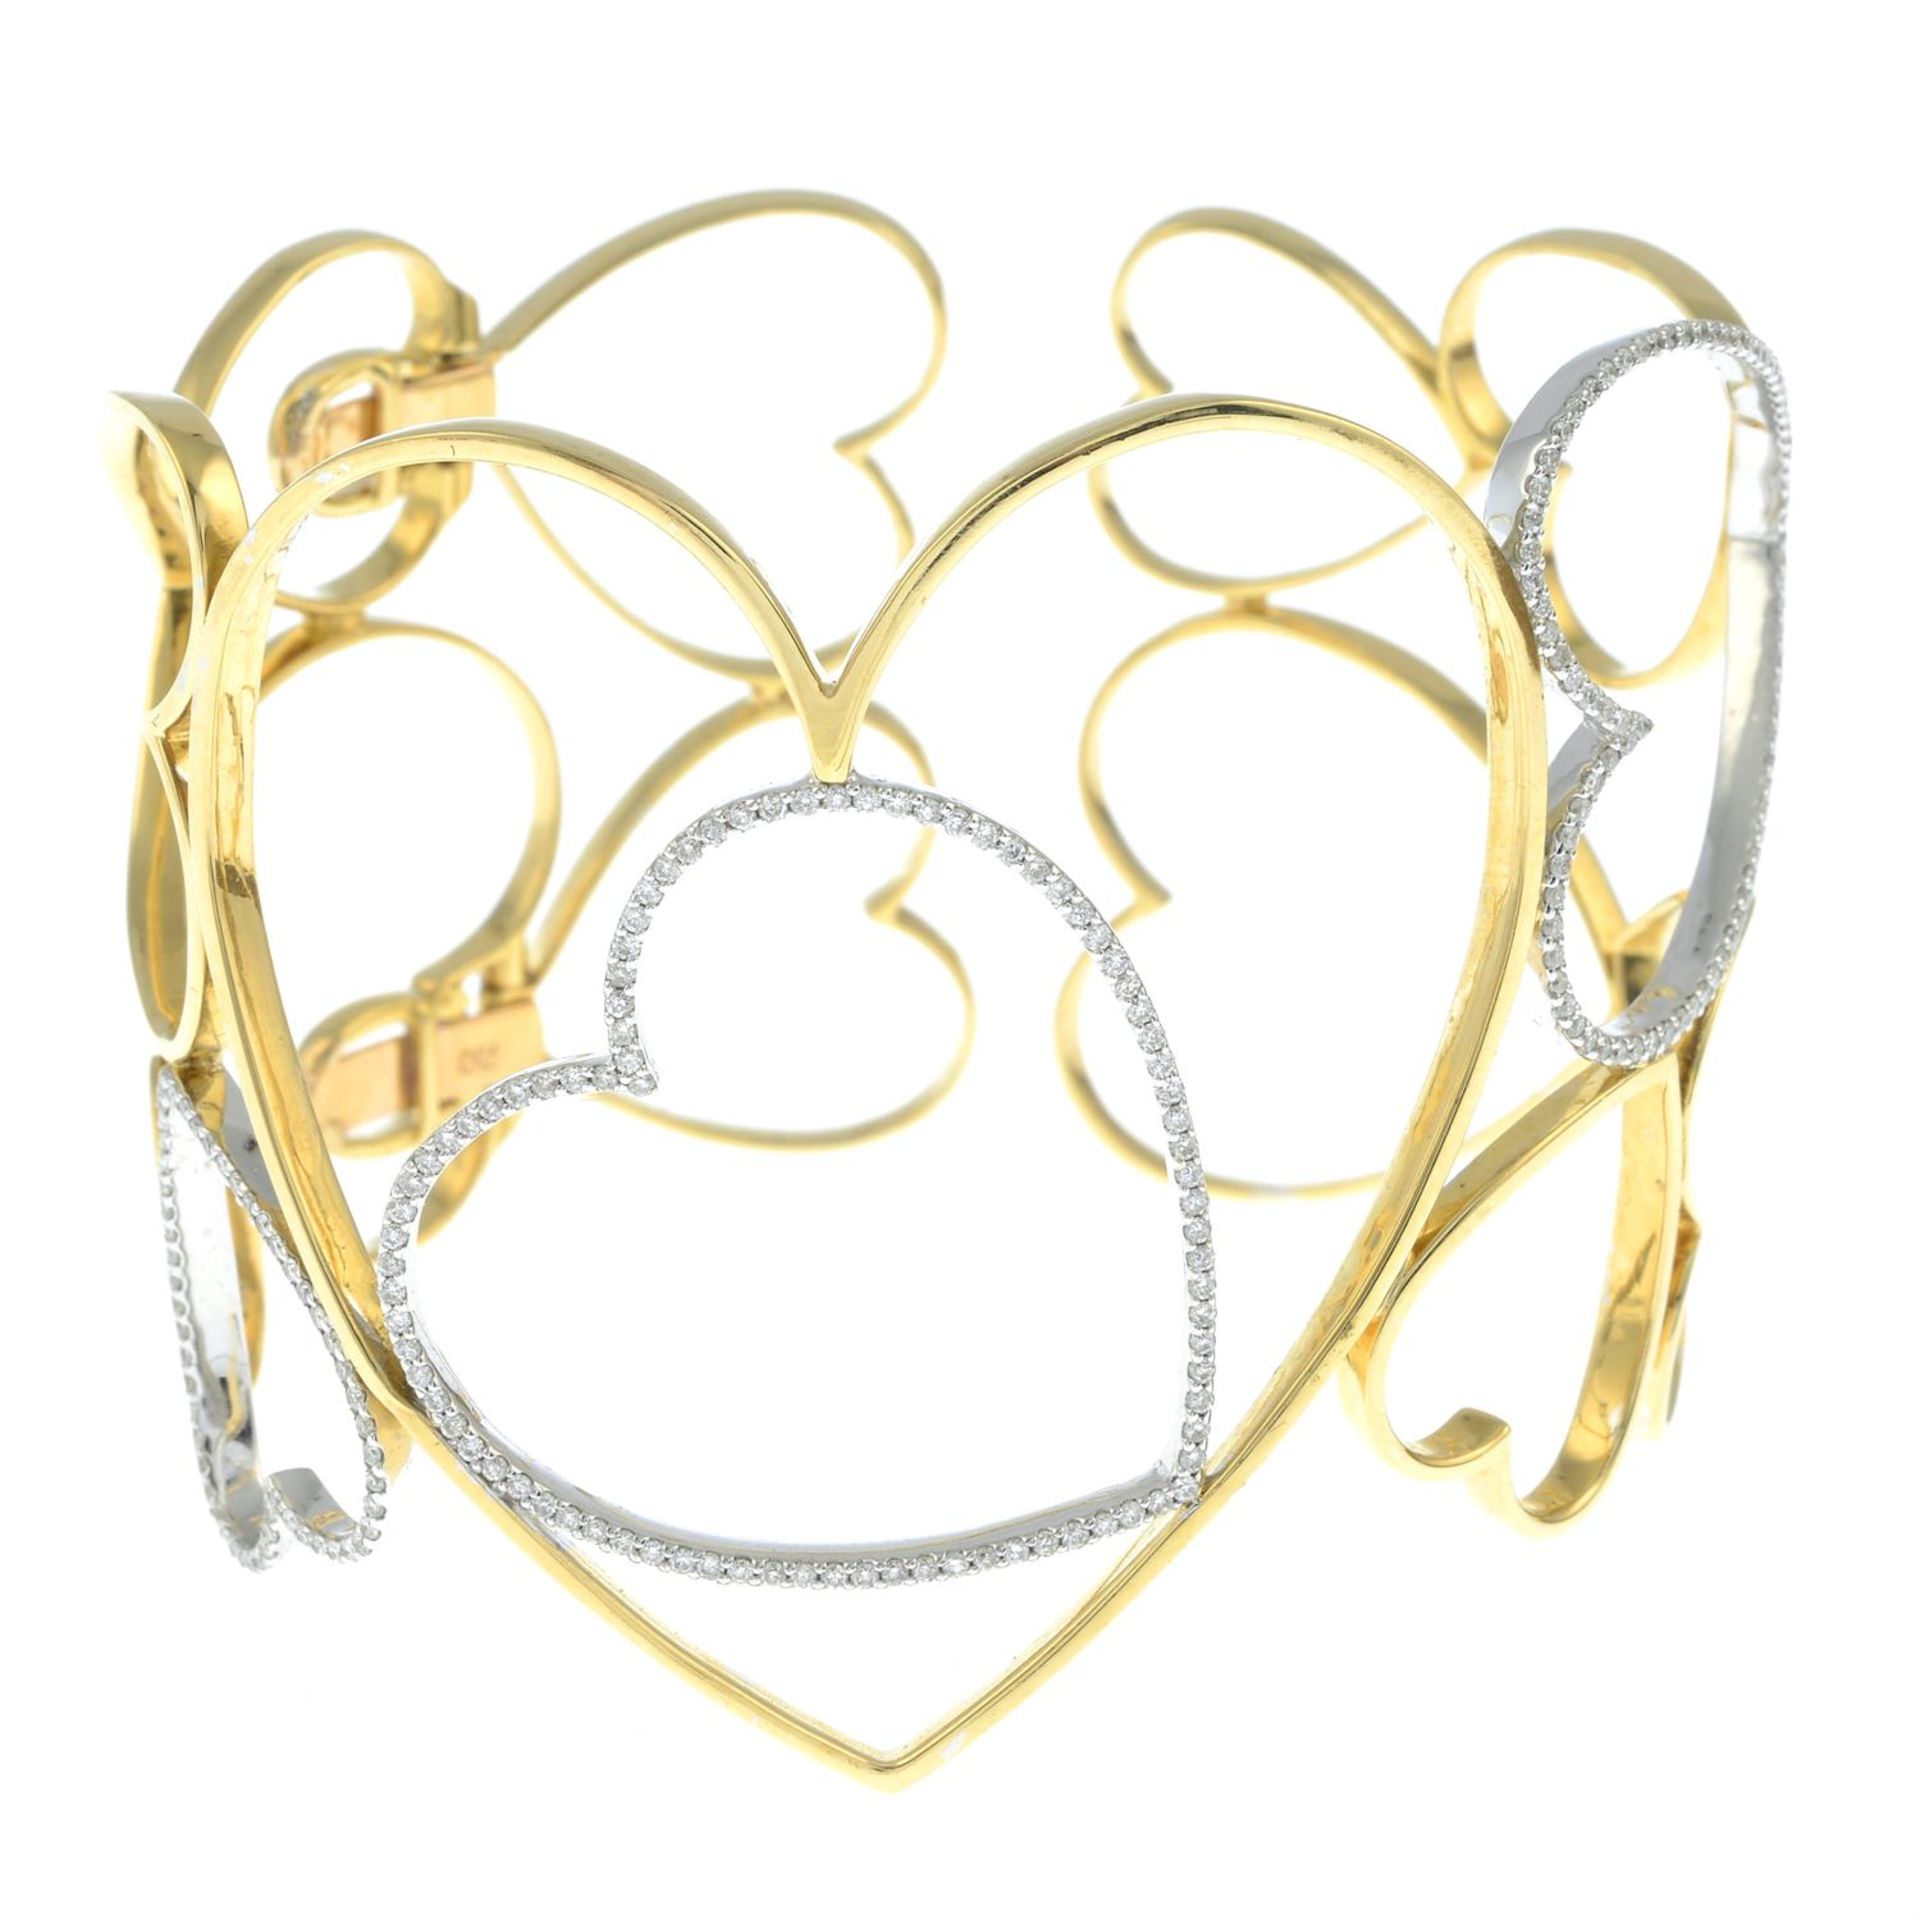 An openwork heart motif bangle, with diamond highlights. - Image 2 of 4